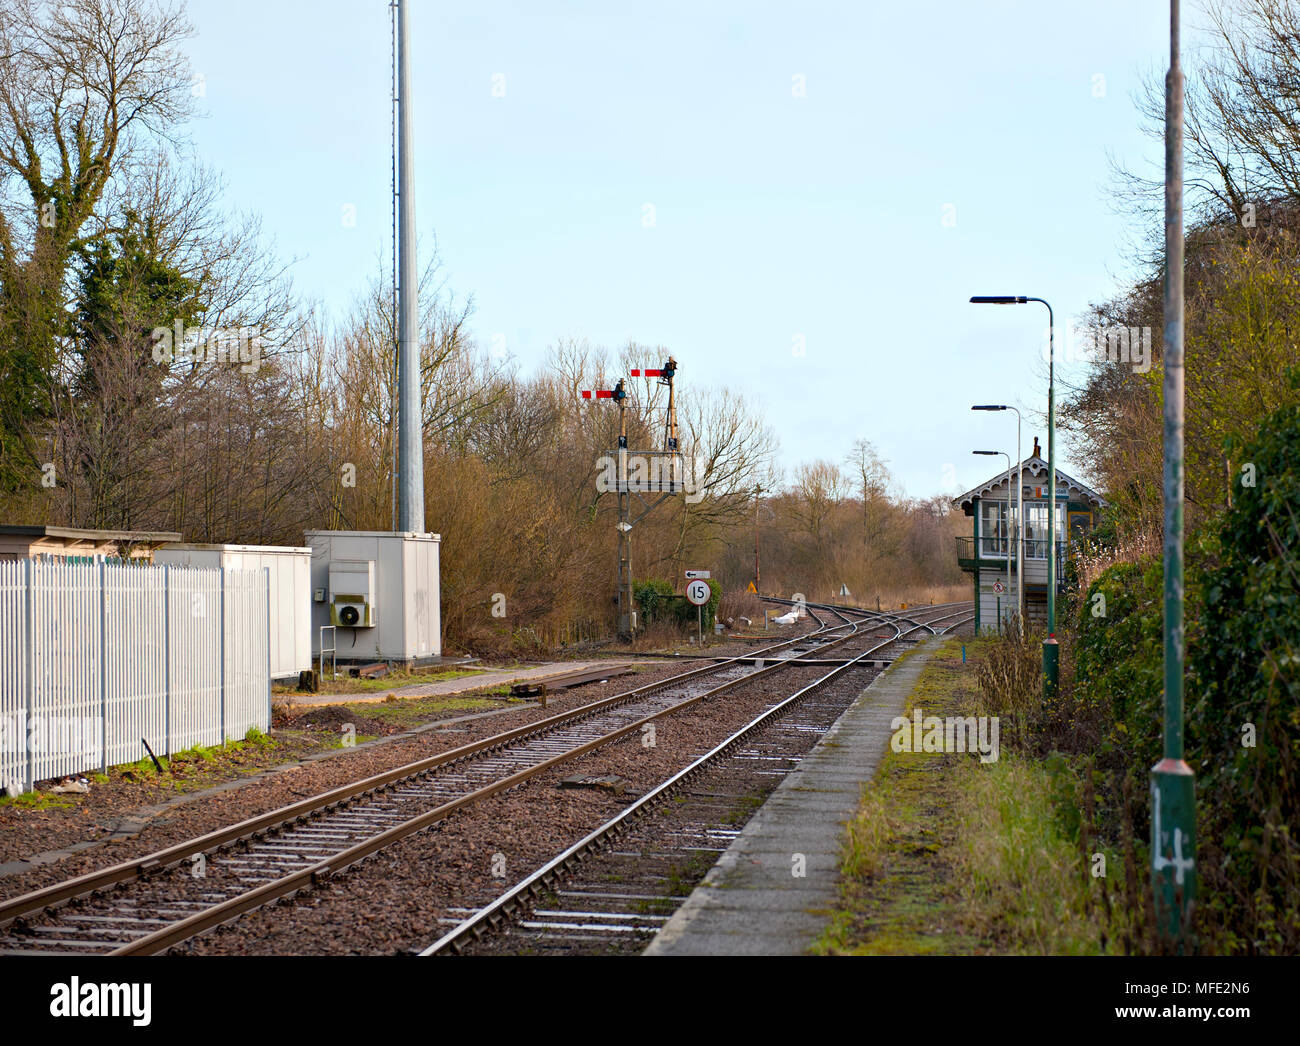 Looking towards Brundall signalbox just outside the station showing the advance starter semaphore signals Stock Photo